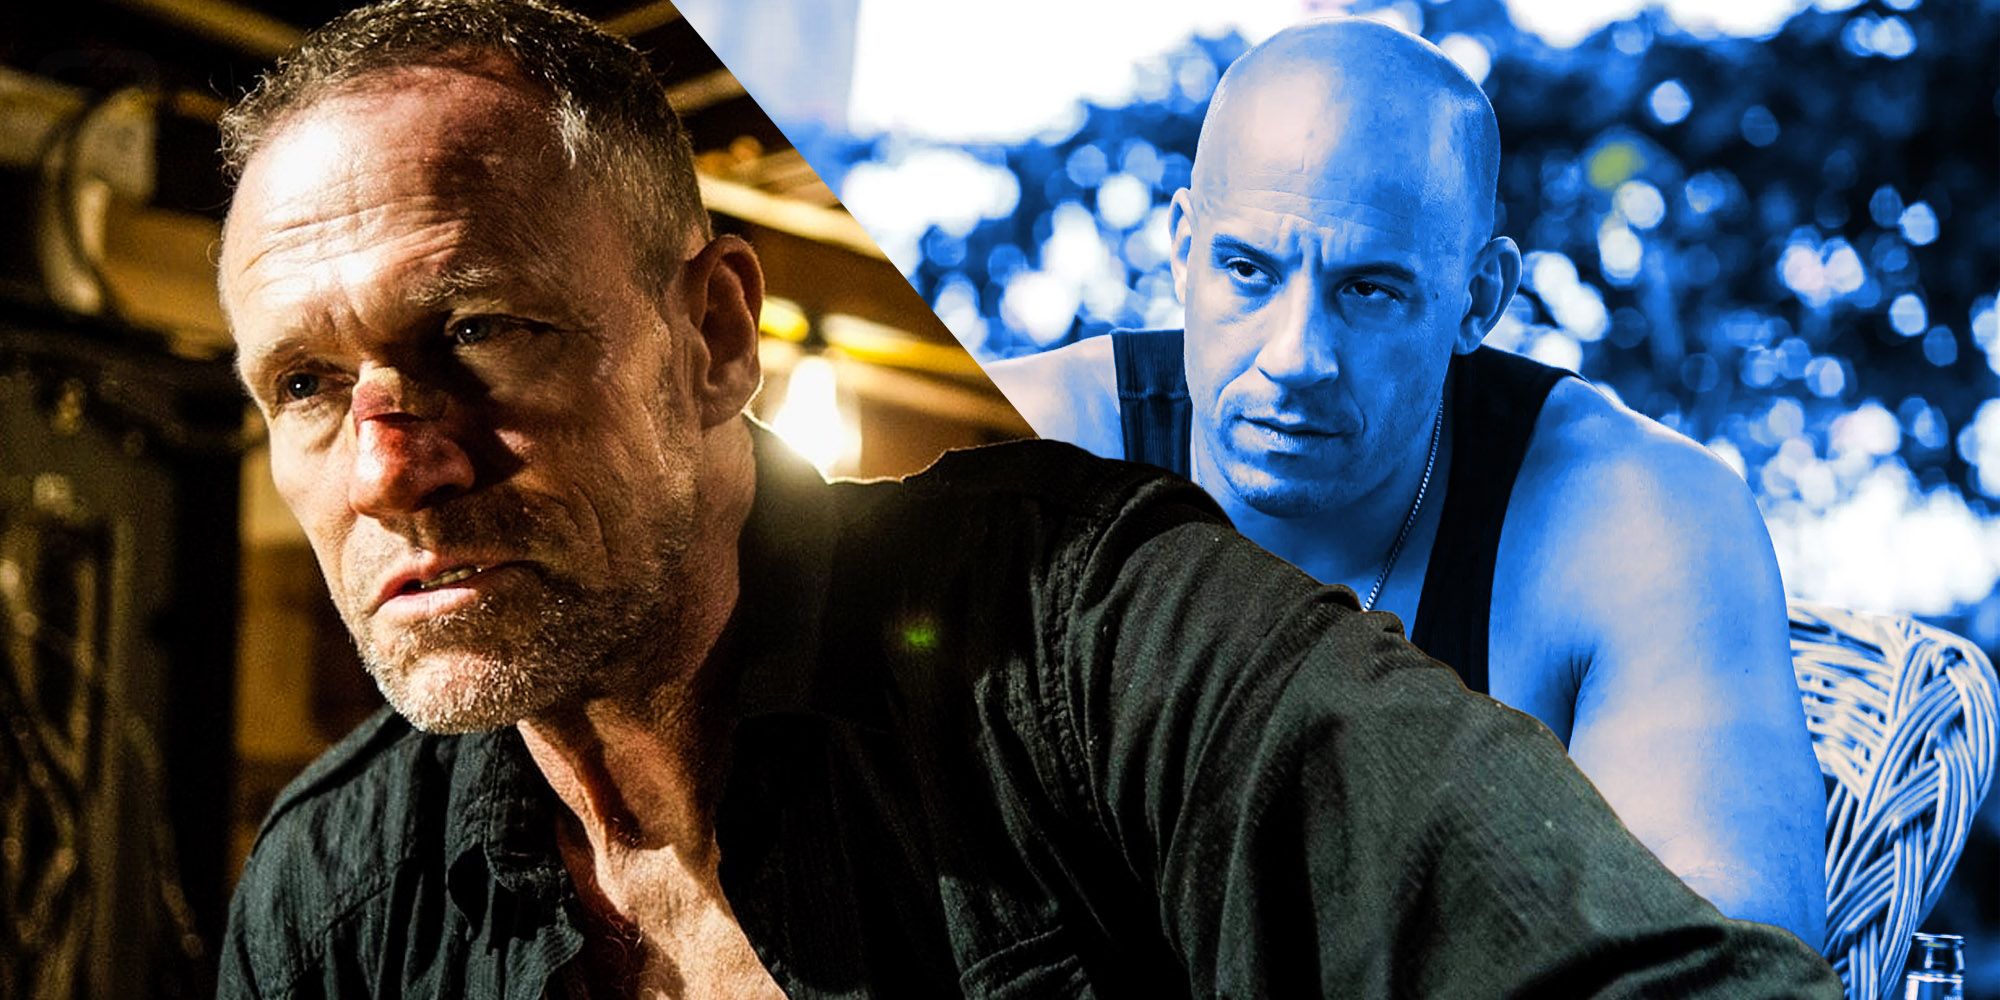 Michael Rooker Buddy Fast and furious 9 Dom Toretto